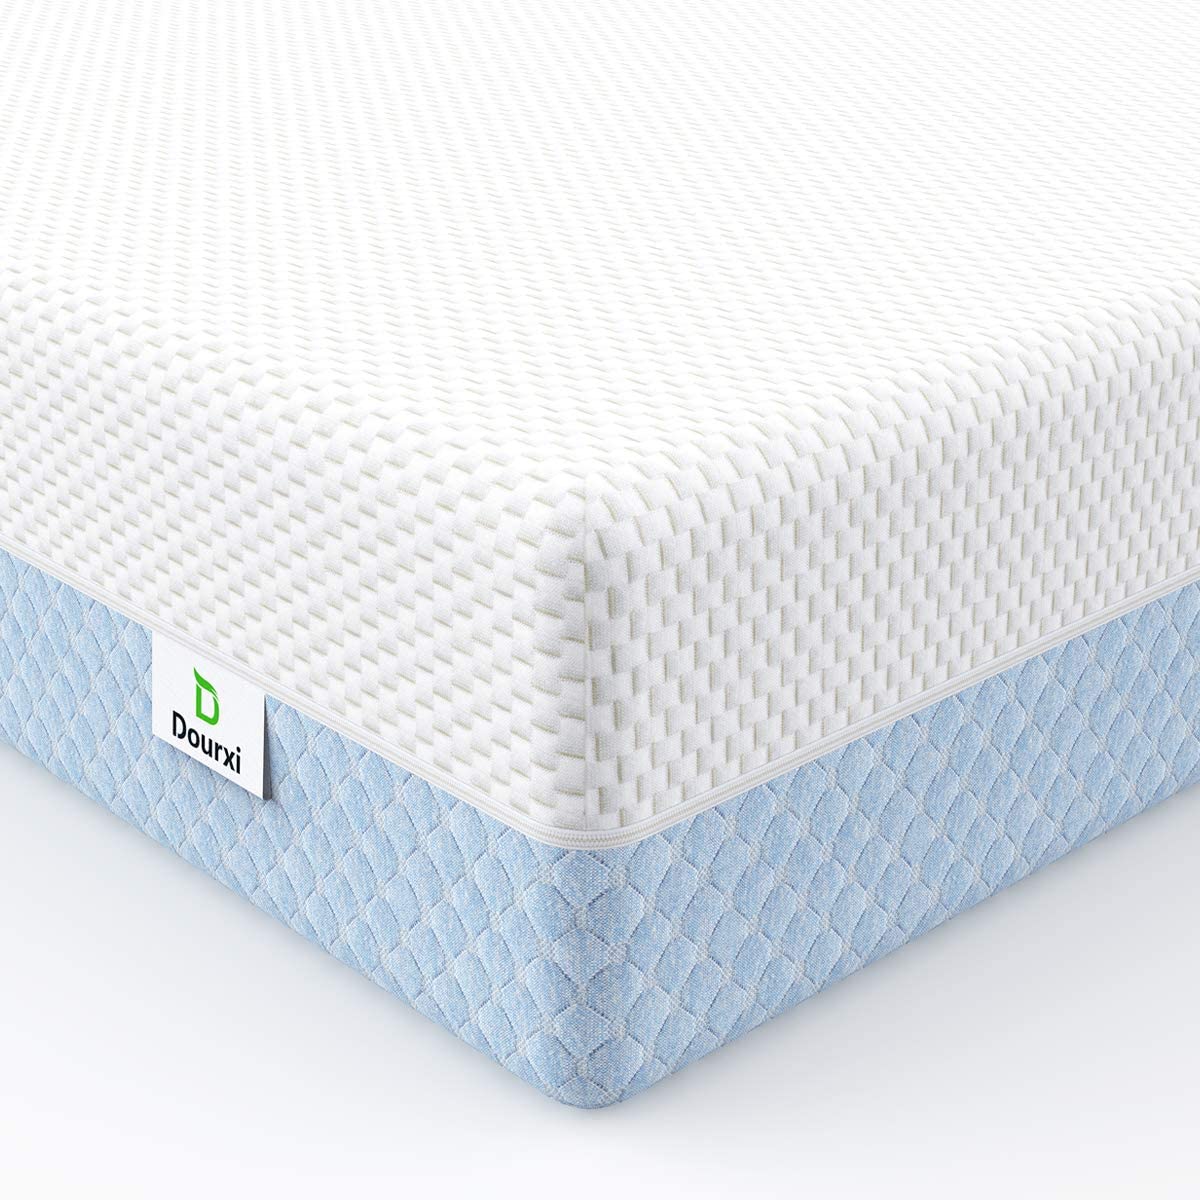 Dourxi Dual Sided Crib and Toddler Mattress, 6 inch 2-in-1 Foam Baby Mattress for Standard Size Crib - image 1 of 9